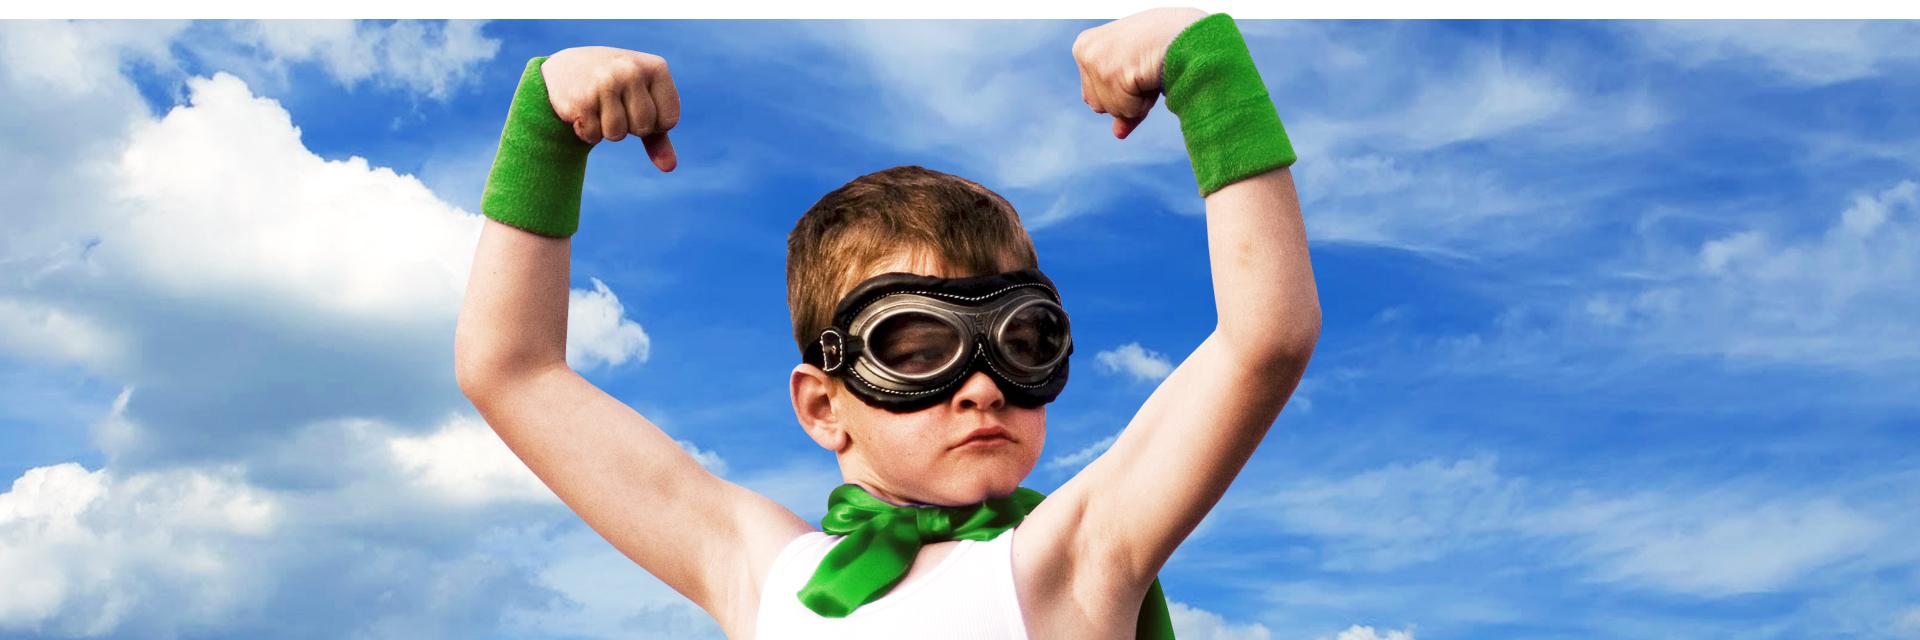 intouch dramatized visual of boy dressed like a superhero and wearing goggles